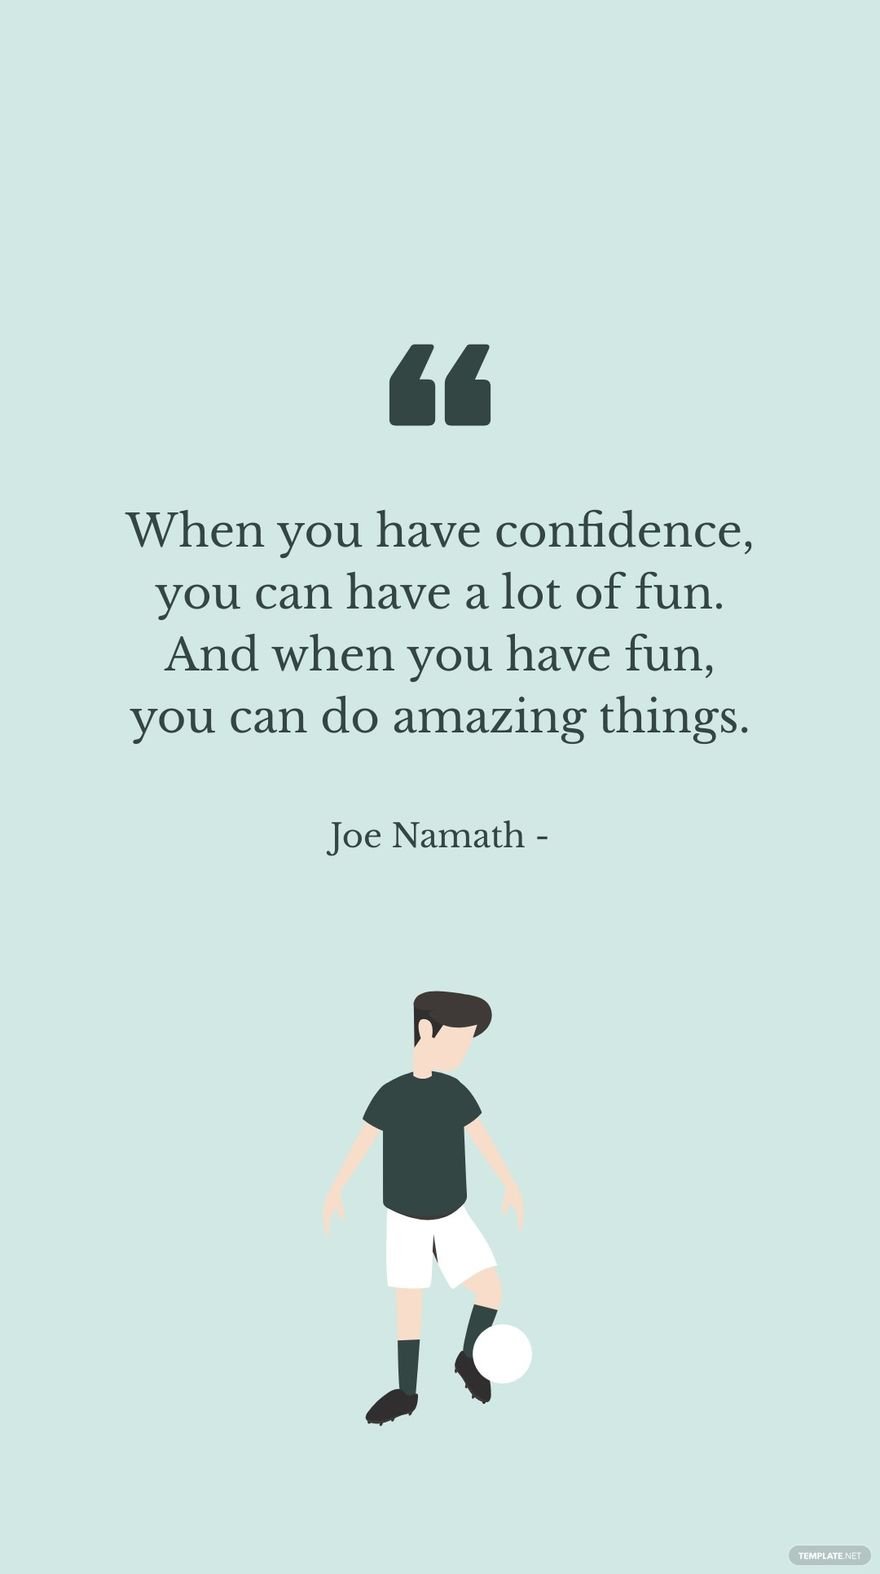 Joe Namath - When you have confidence, you can have a lot of fun. And when you have fun, you can do amazing things.